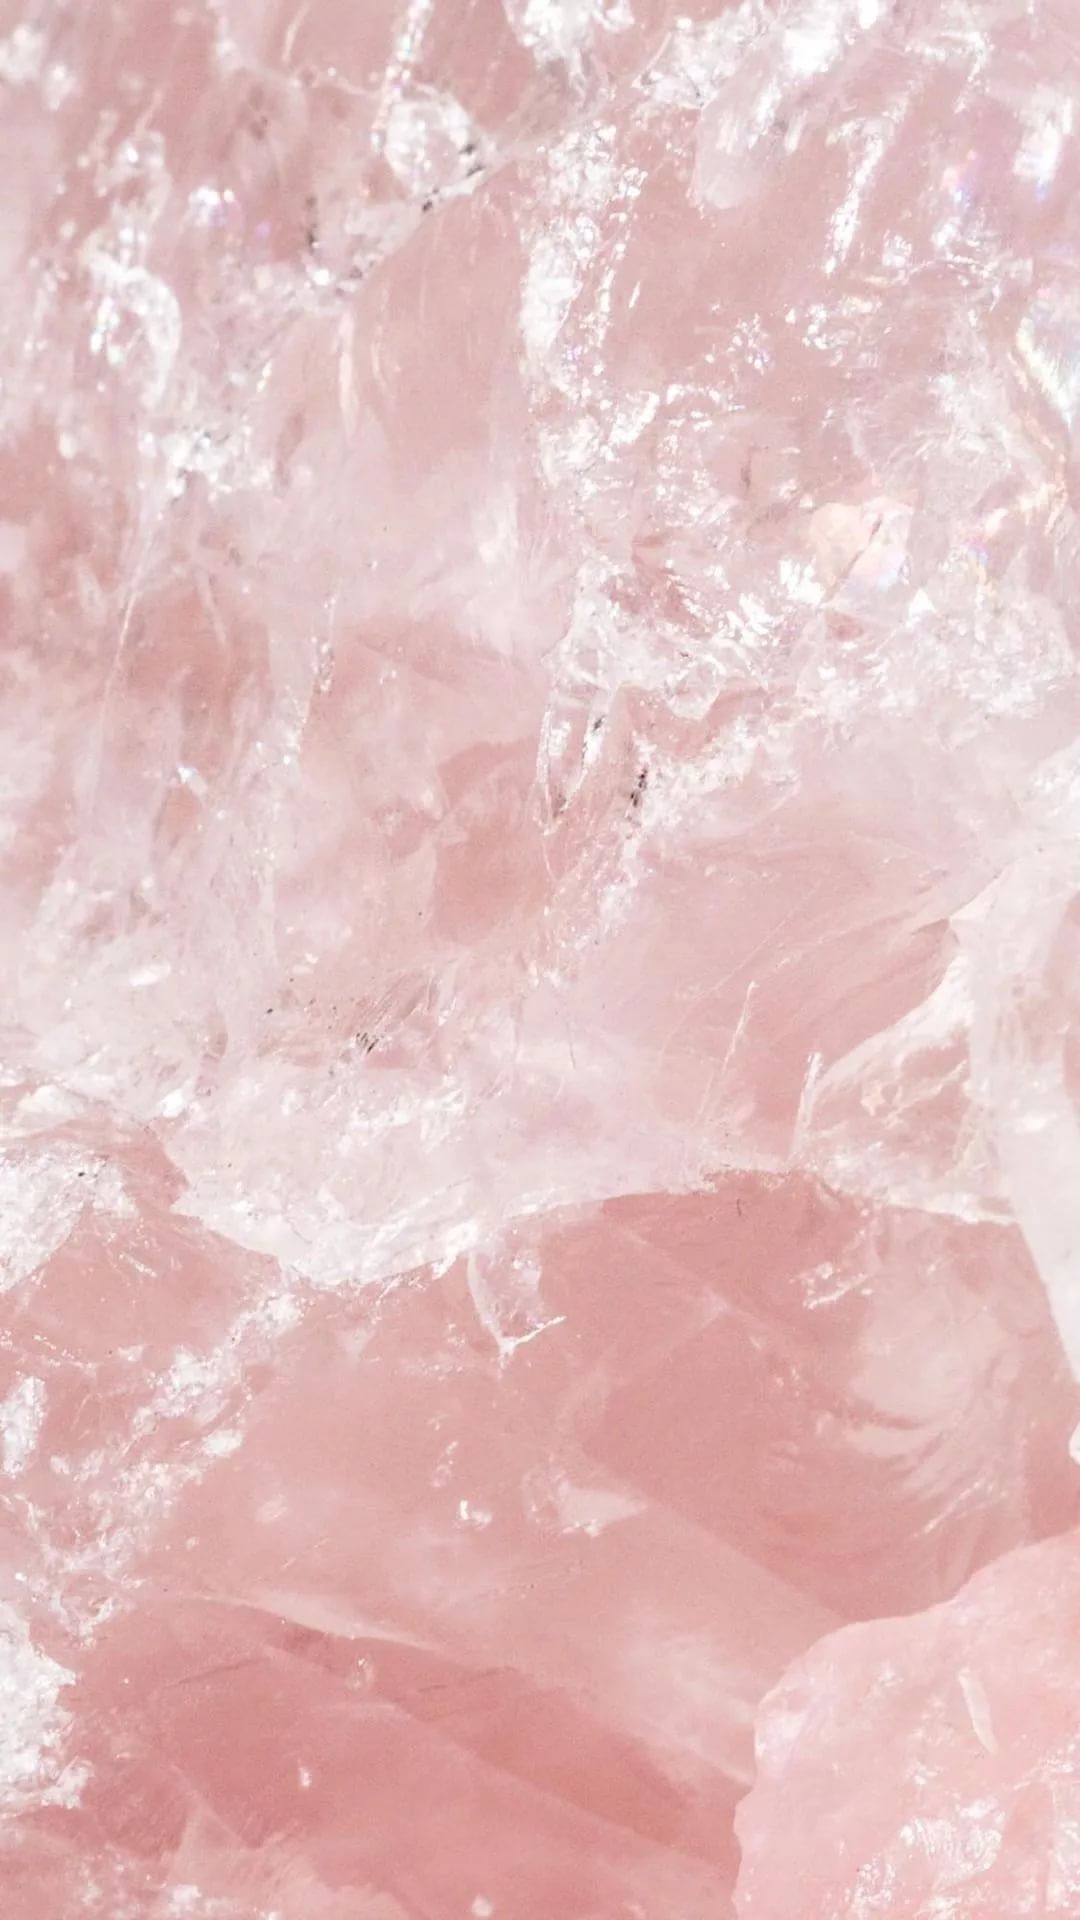 Marble iPhone hd wallpaper